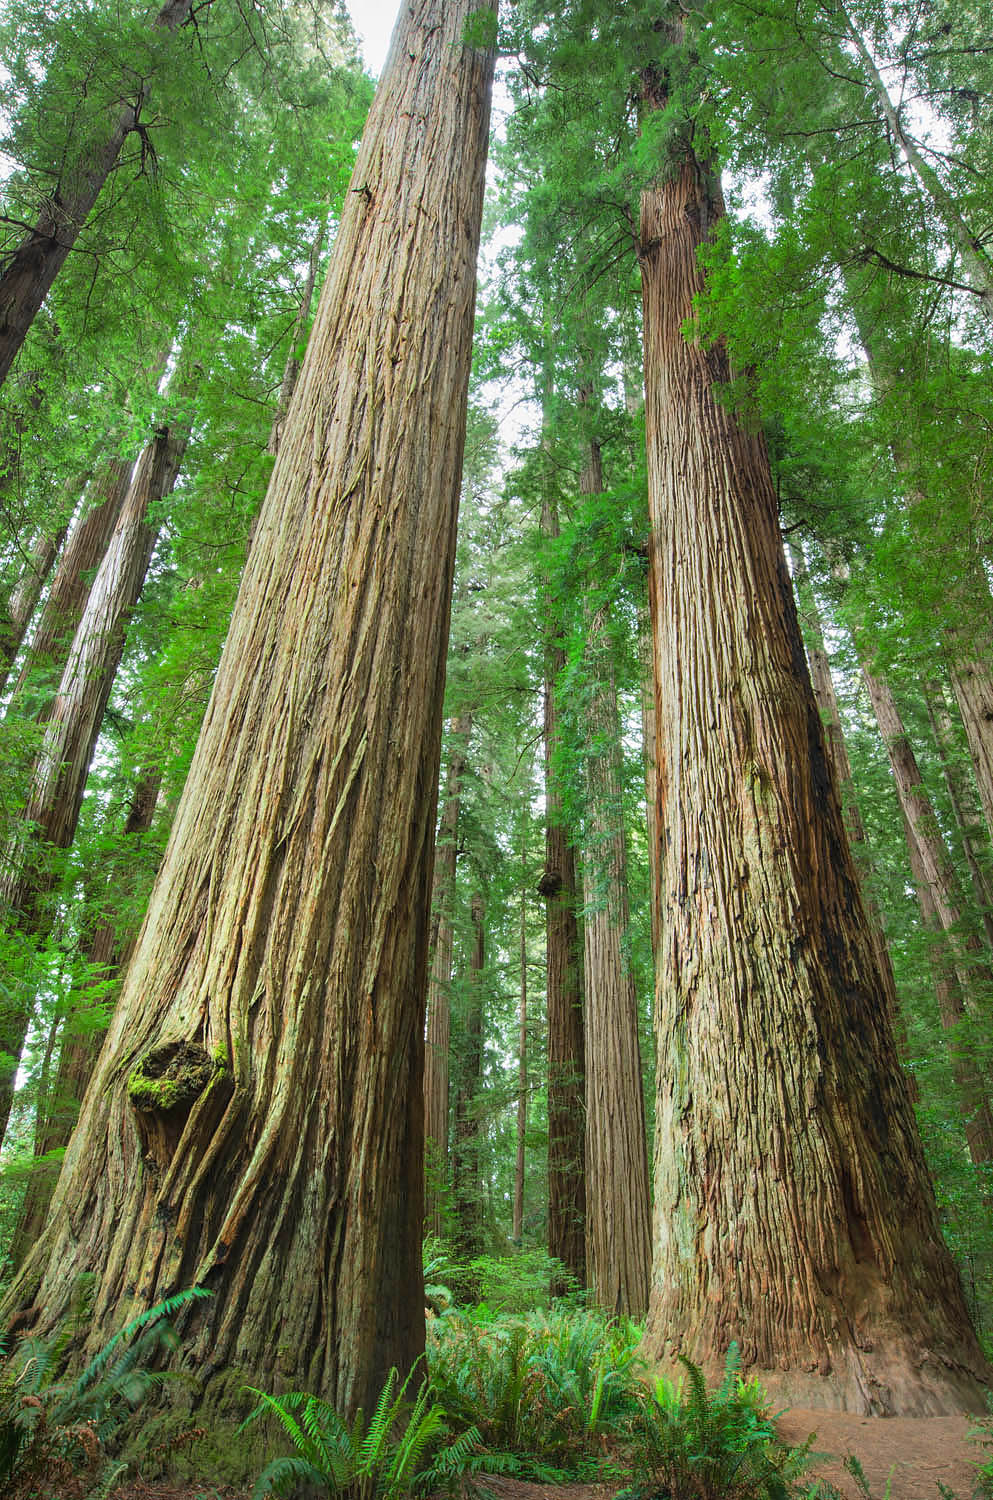 Ancient Redwoods (Sequoia sempervirens) of the Stout Grove in Jedidiah Smith Redwoods State Park California #44497